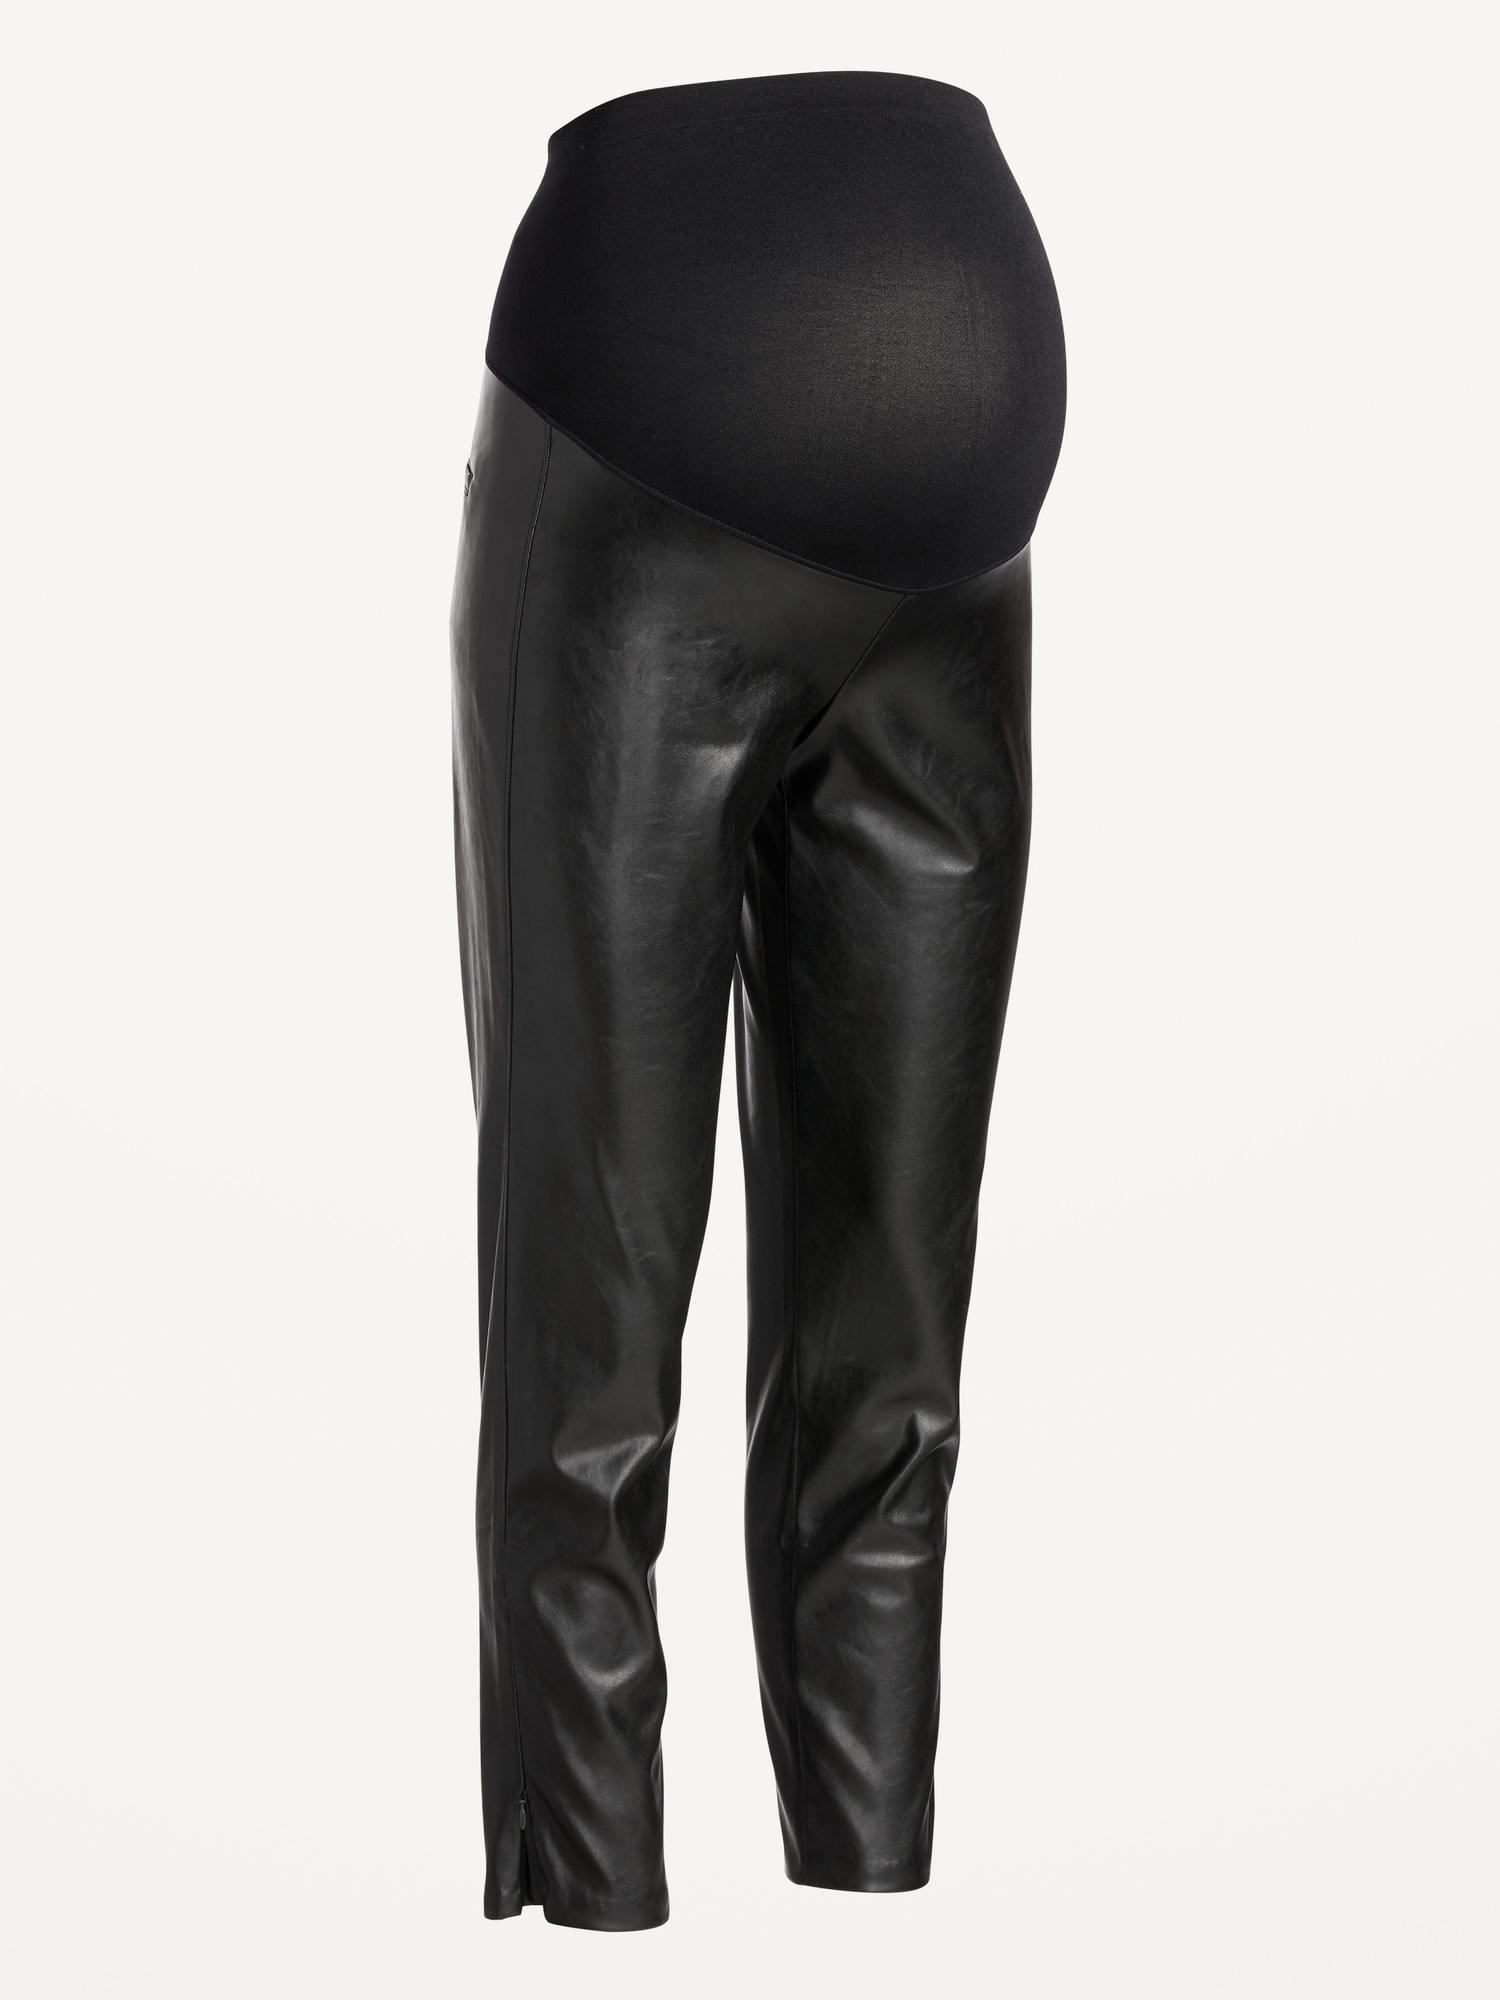 Gap - Maternity Solid Black Faux Leather Pants Size M (Maternity) - 72% off